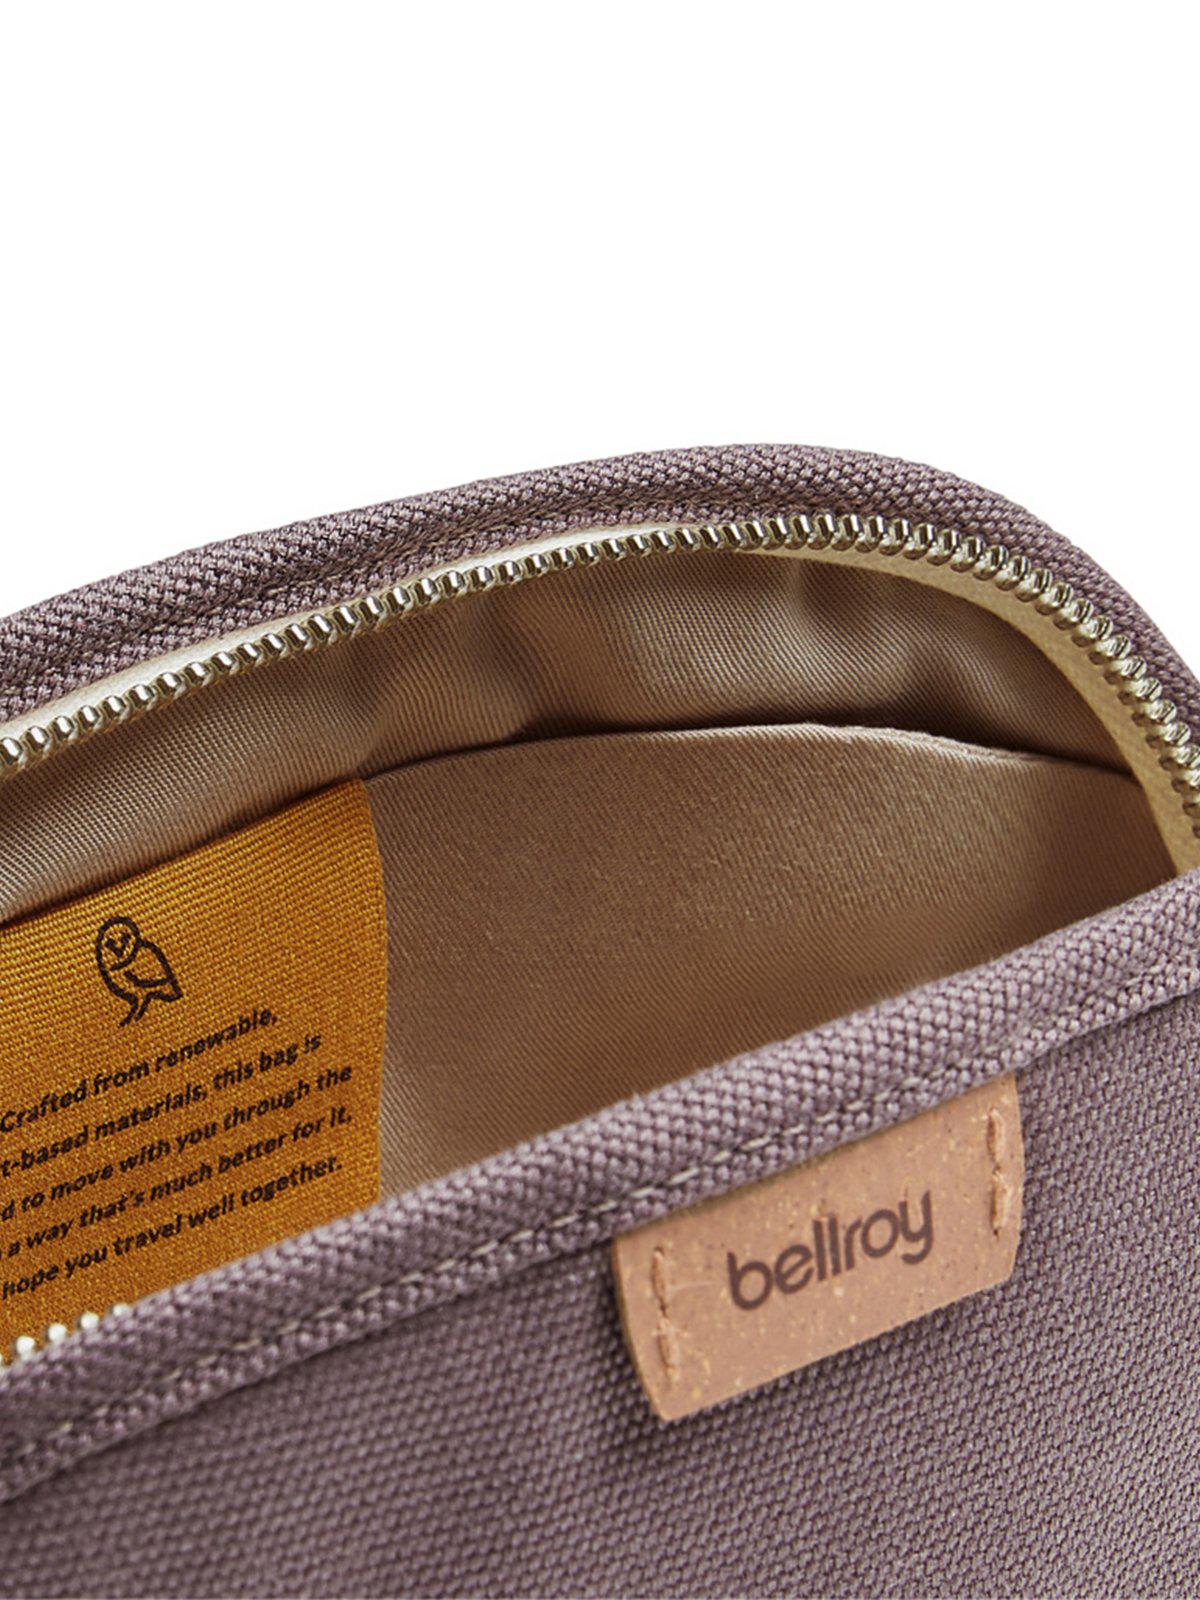 Bellroy Classic Pouch Gumnut (Plant-Based / Leather-Free)